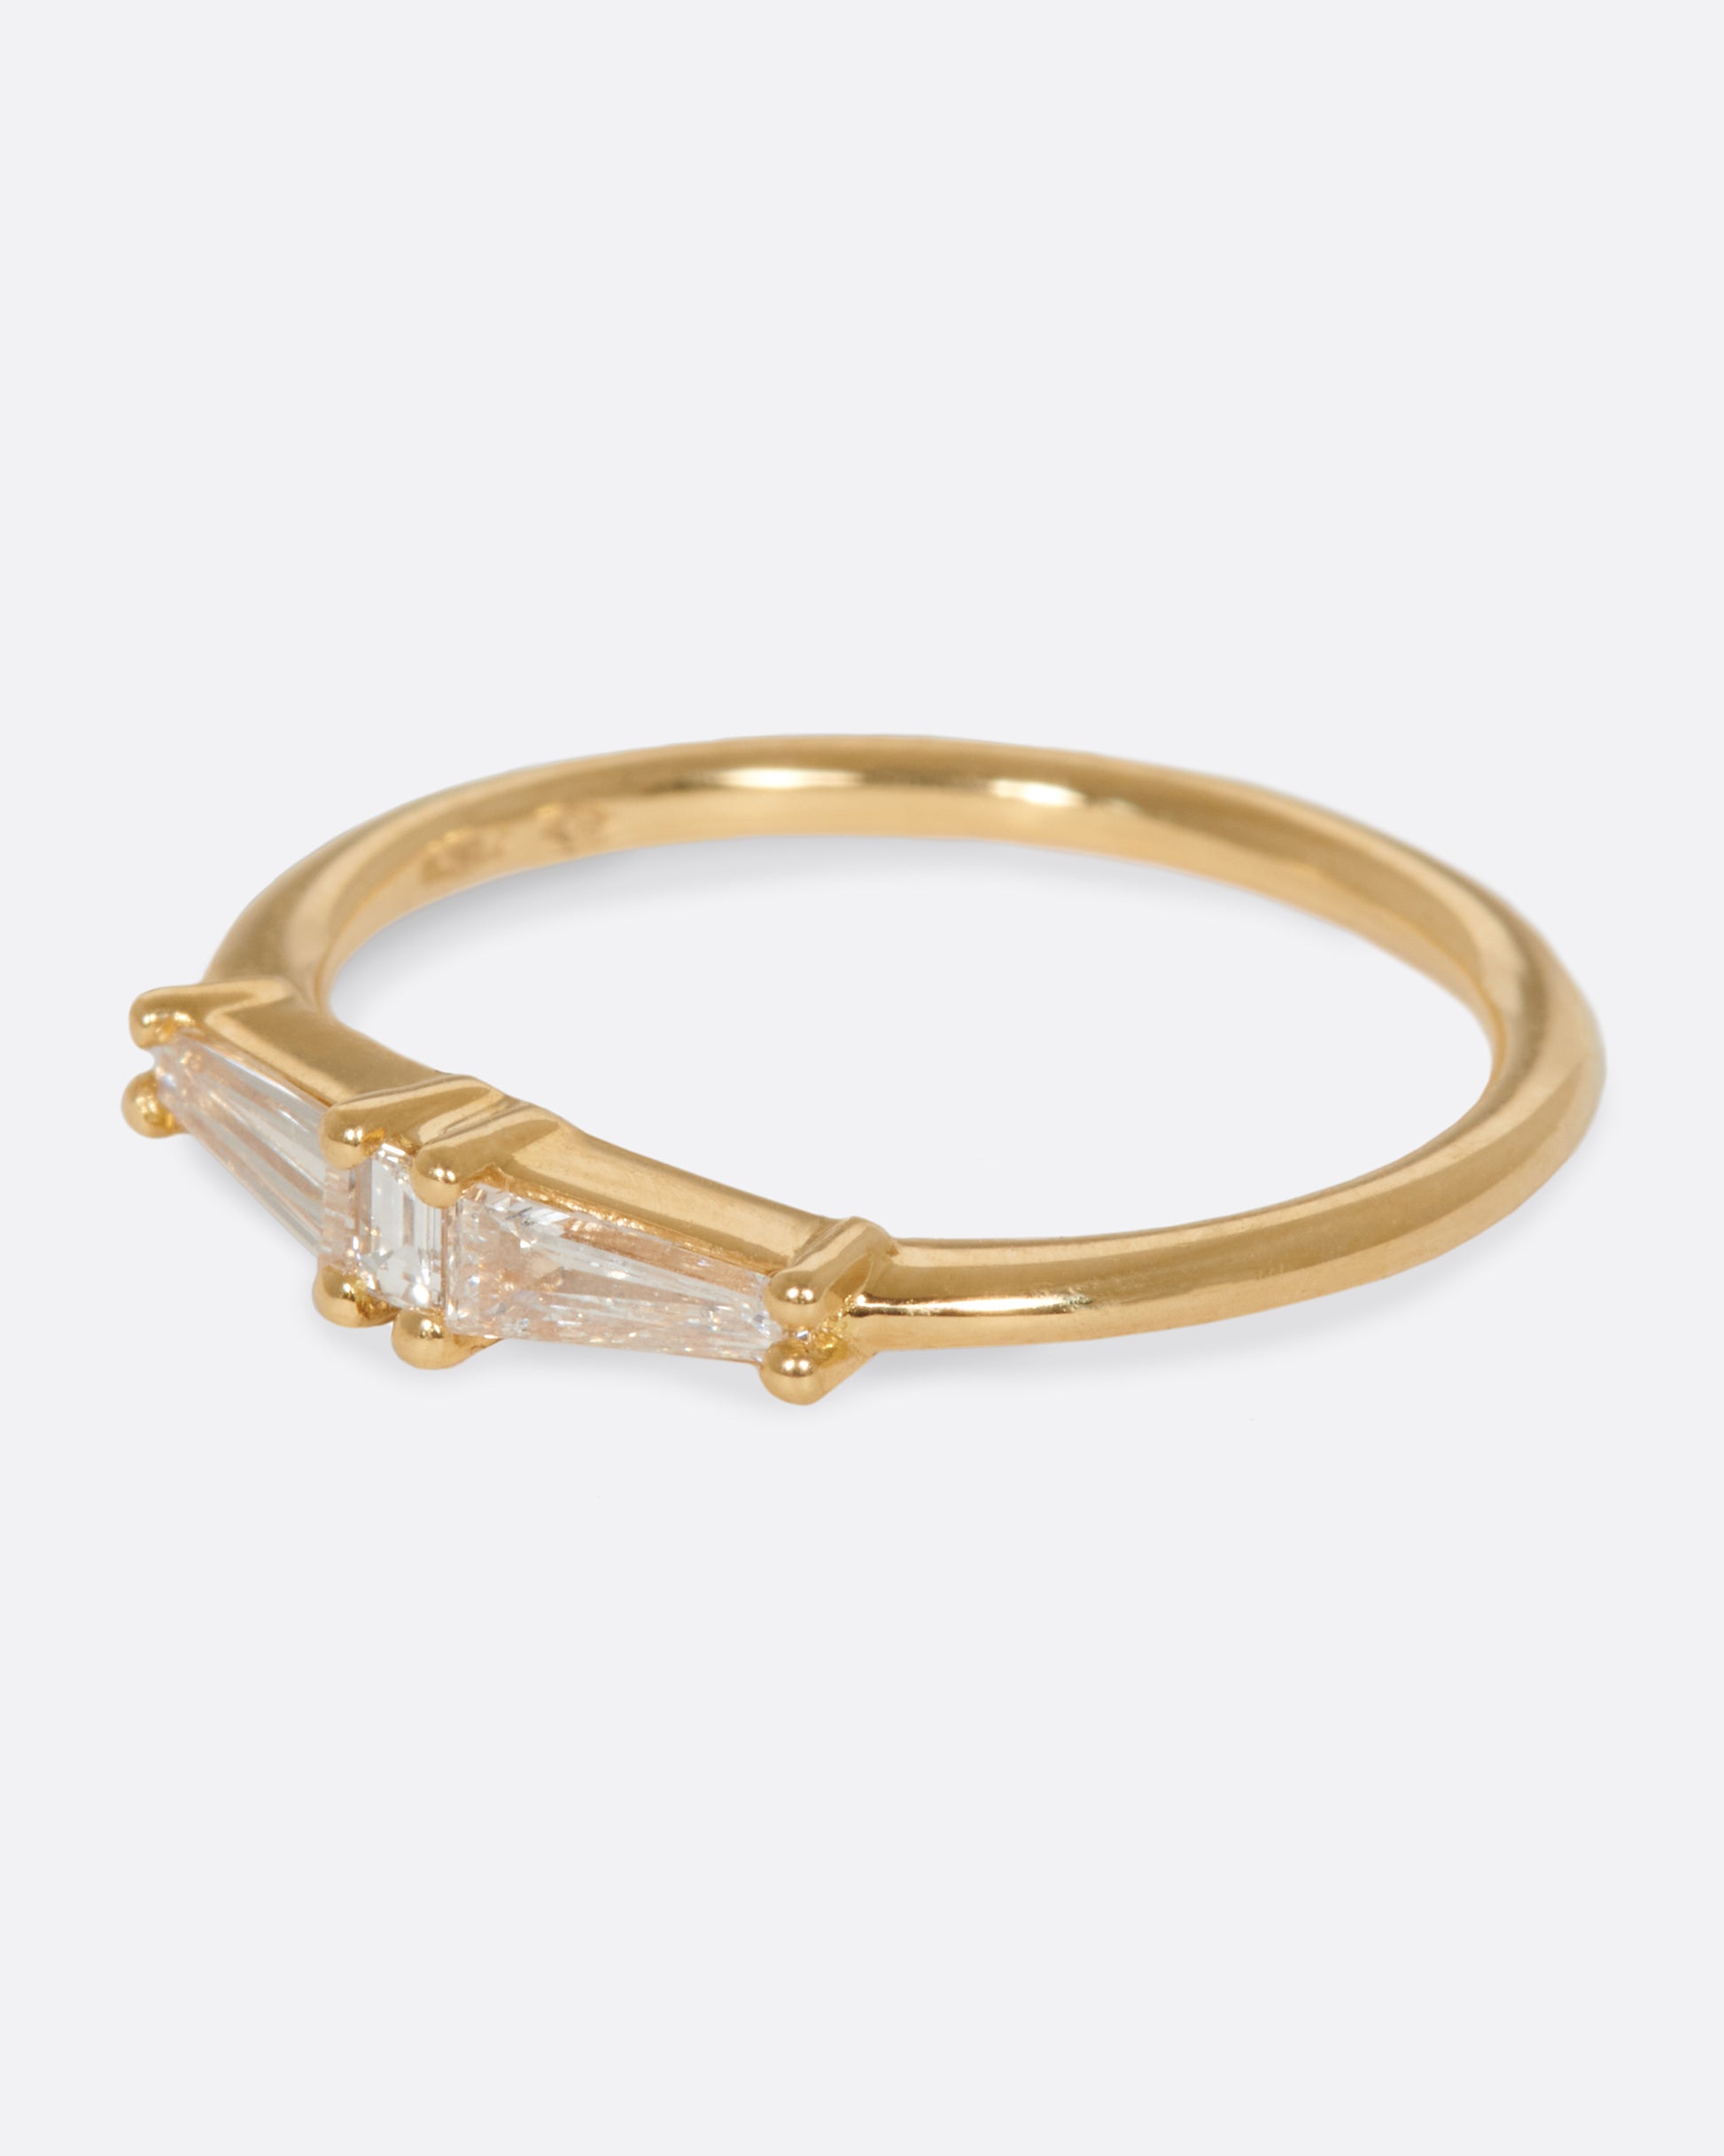 A ring featuring two tapered baguette diamonds and one carre cut diamond; perfect for stacking.